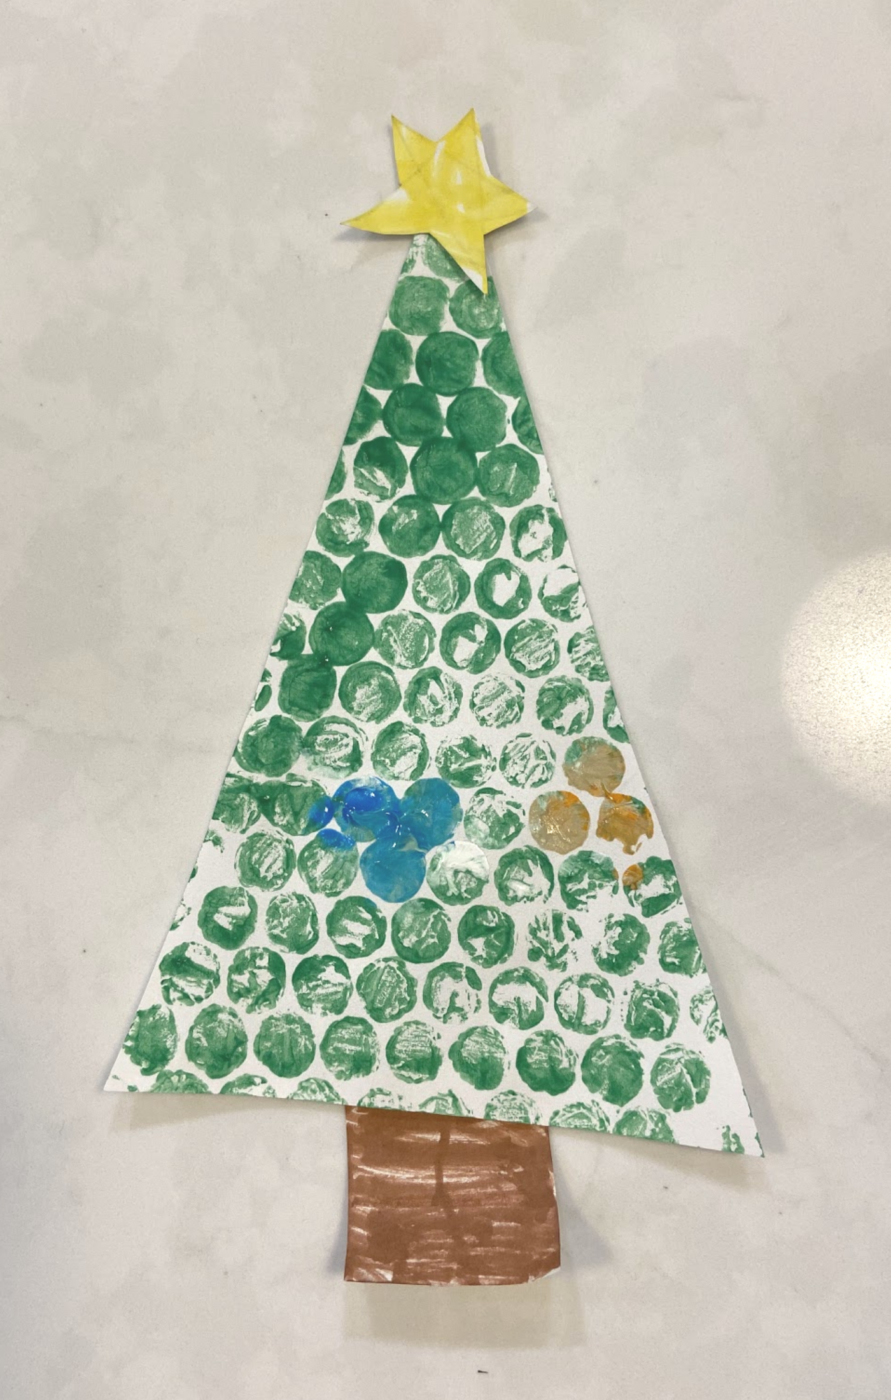 Paper tree decorated with green, blue, and cold dots. It also has a yellow star on the top.